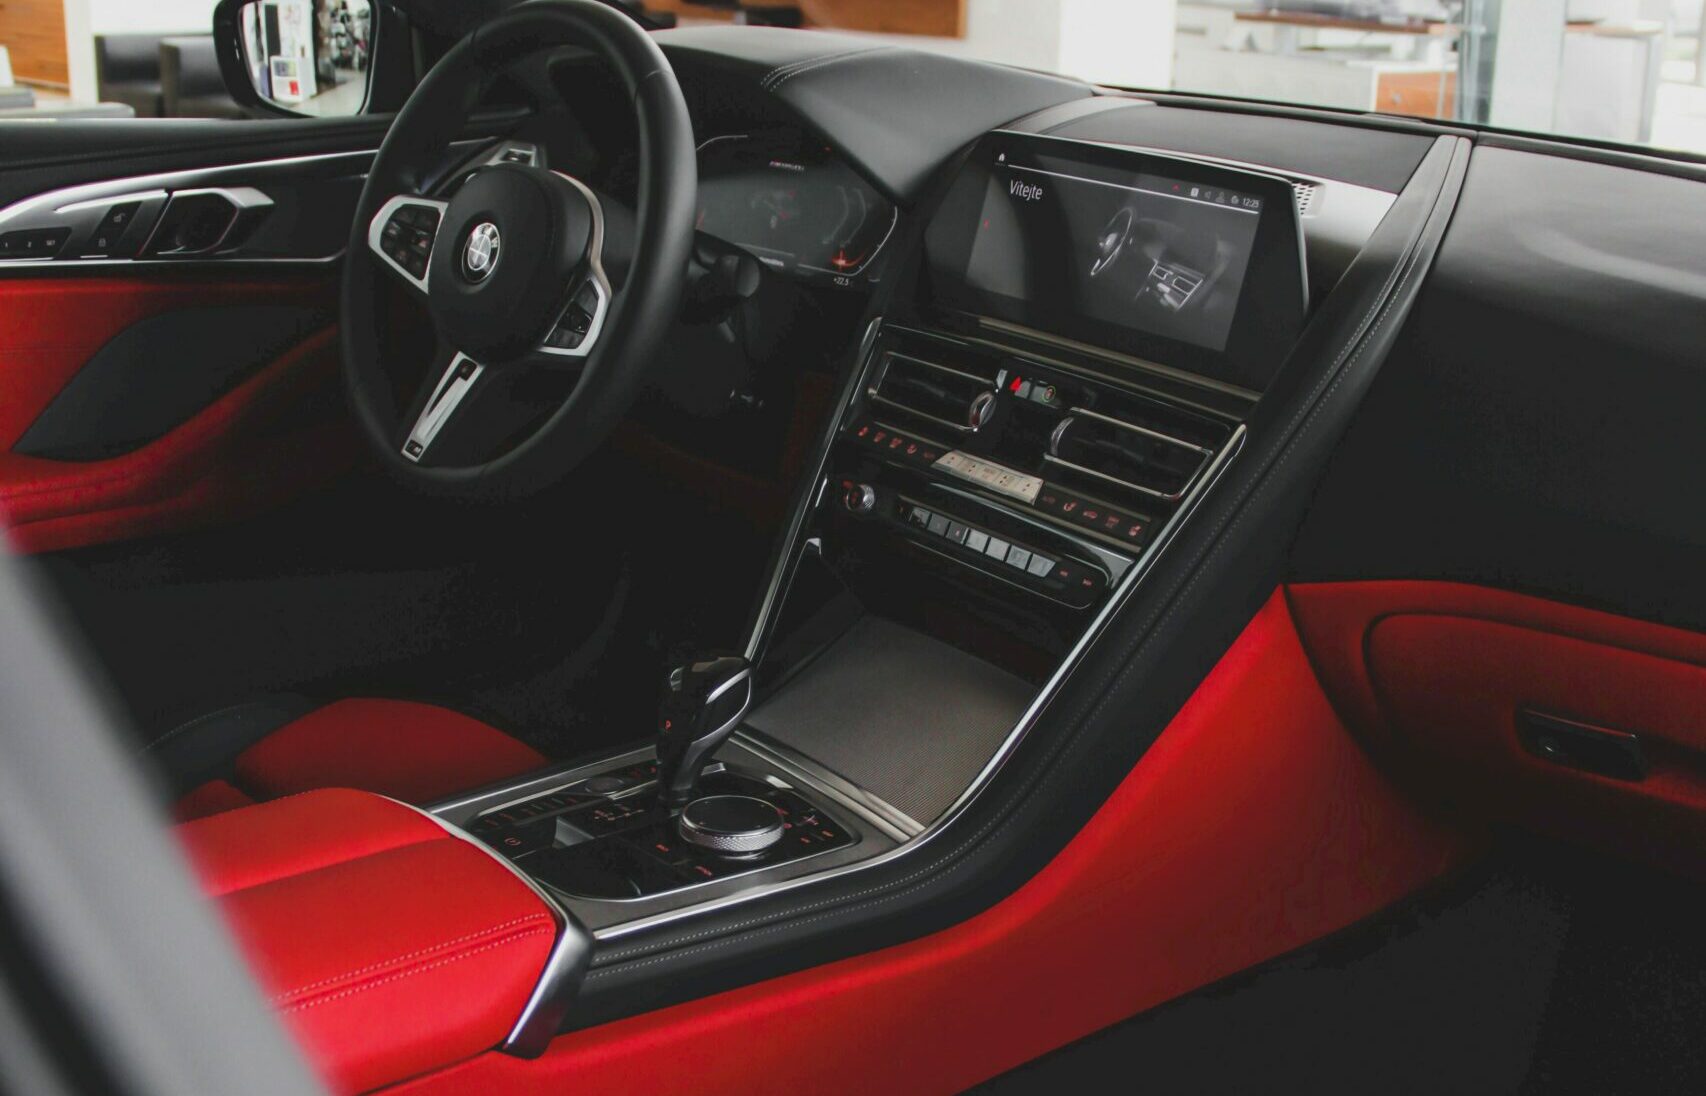 Improving your Car’s Interior for Cleanliness, Storage, and Style